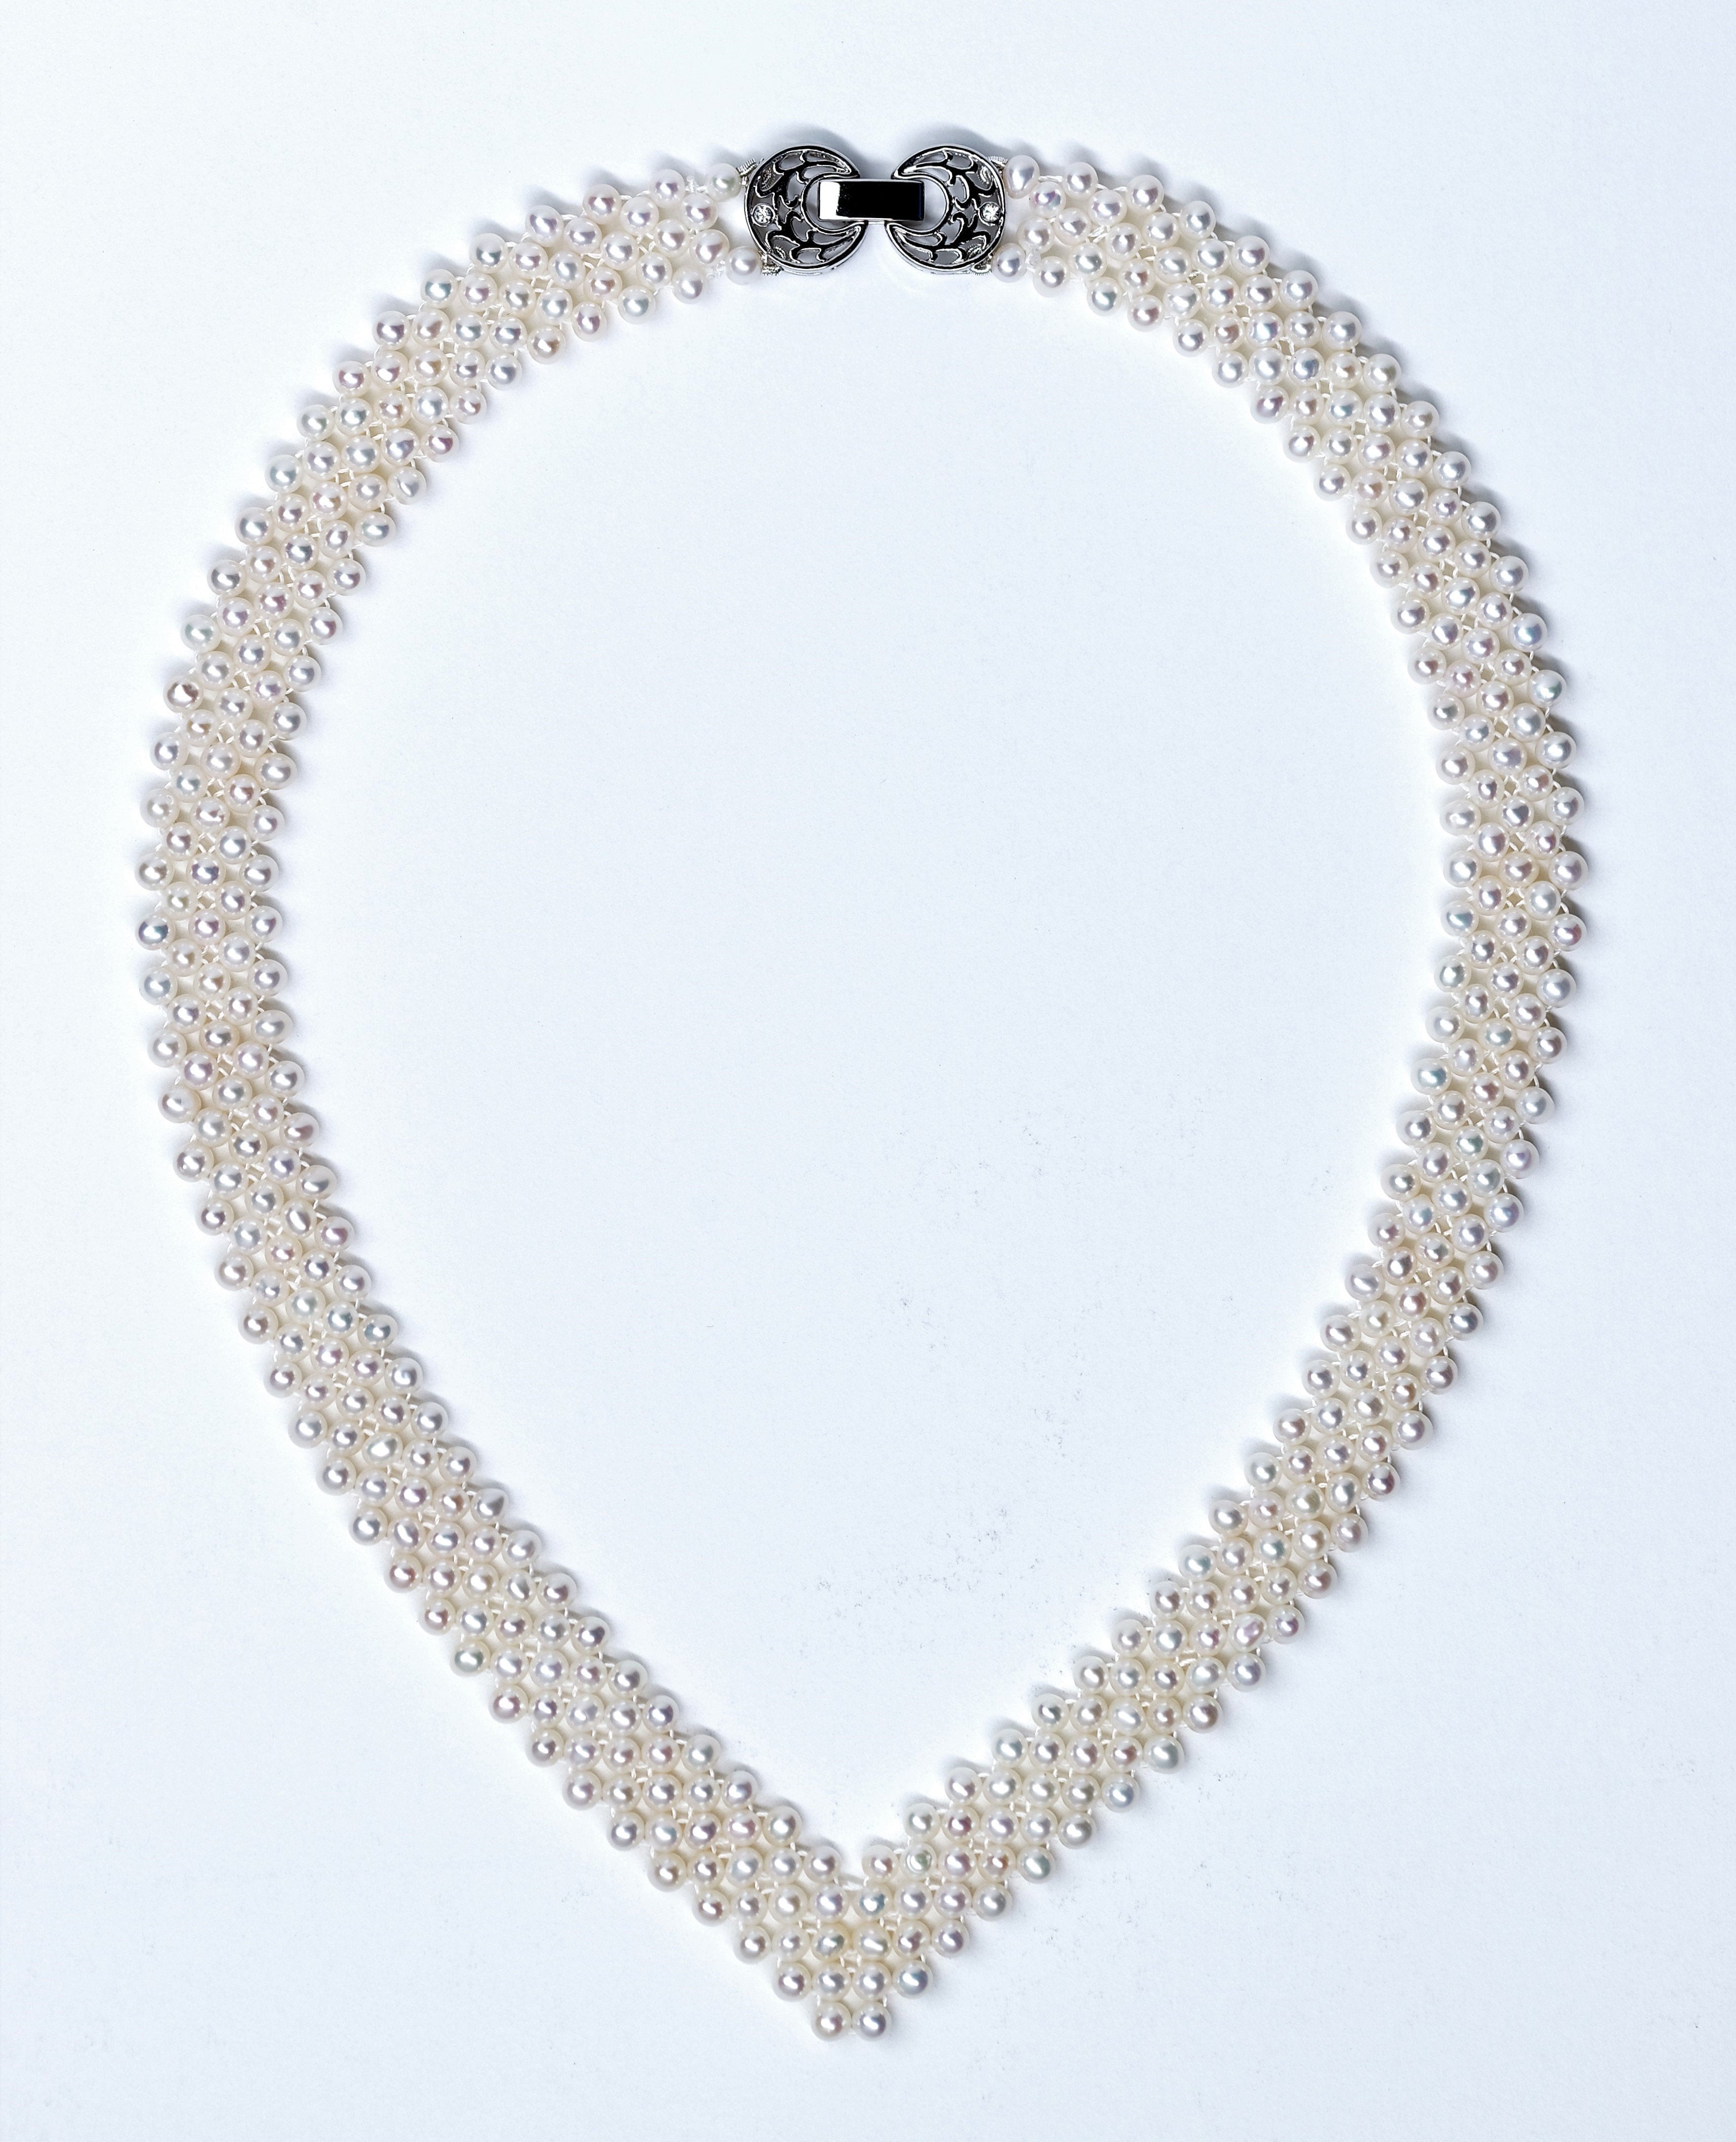 V -Shape Baby Pearl Necklace